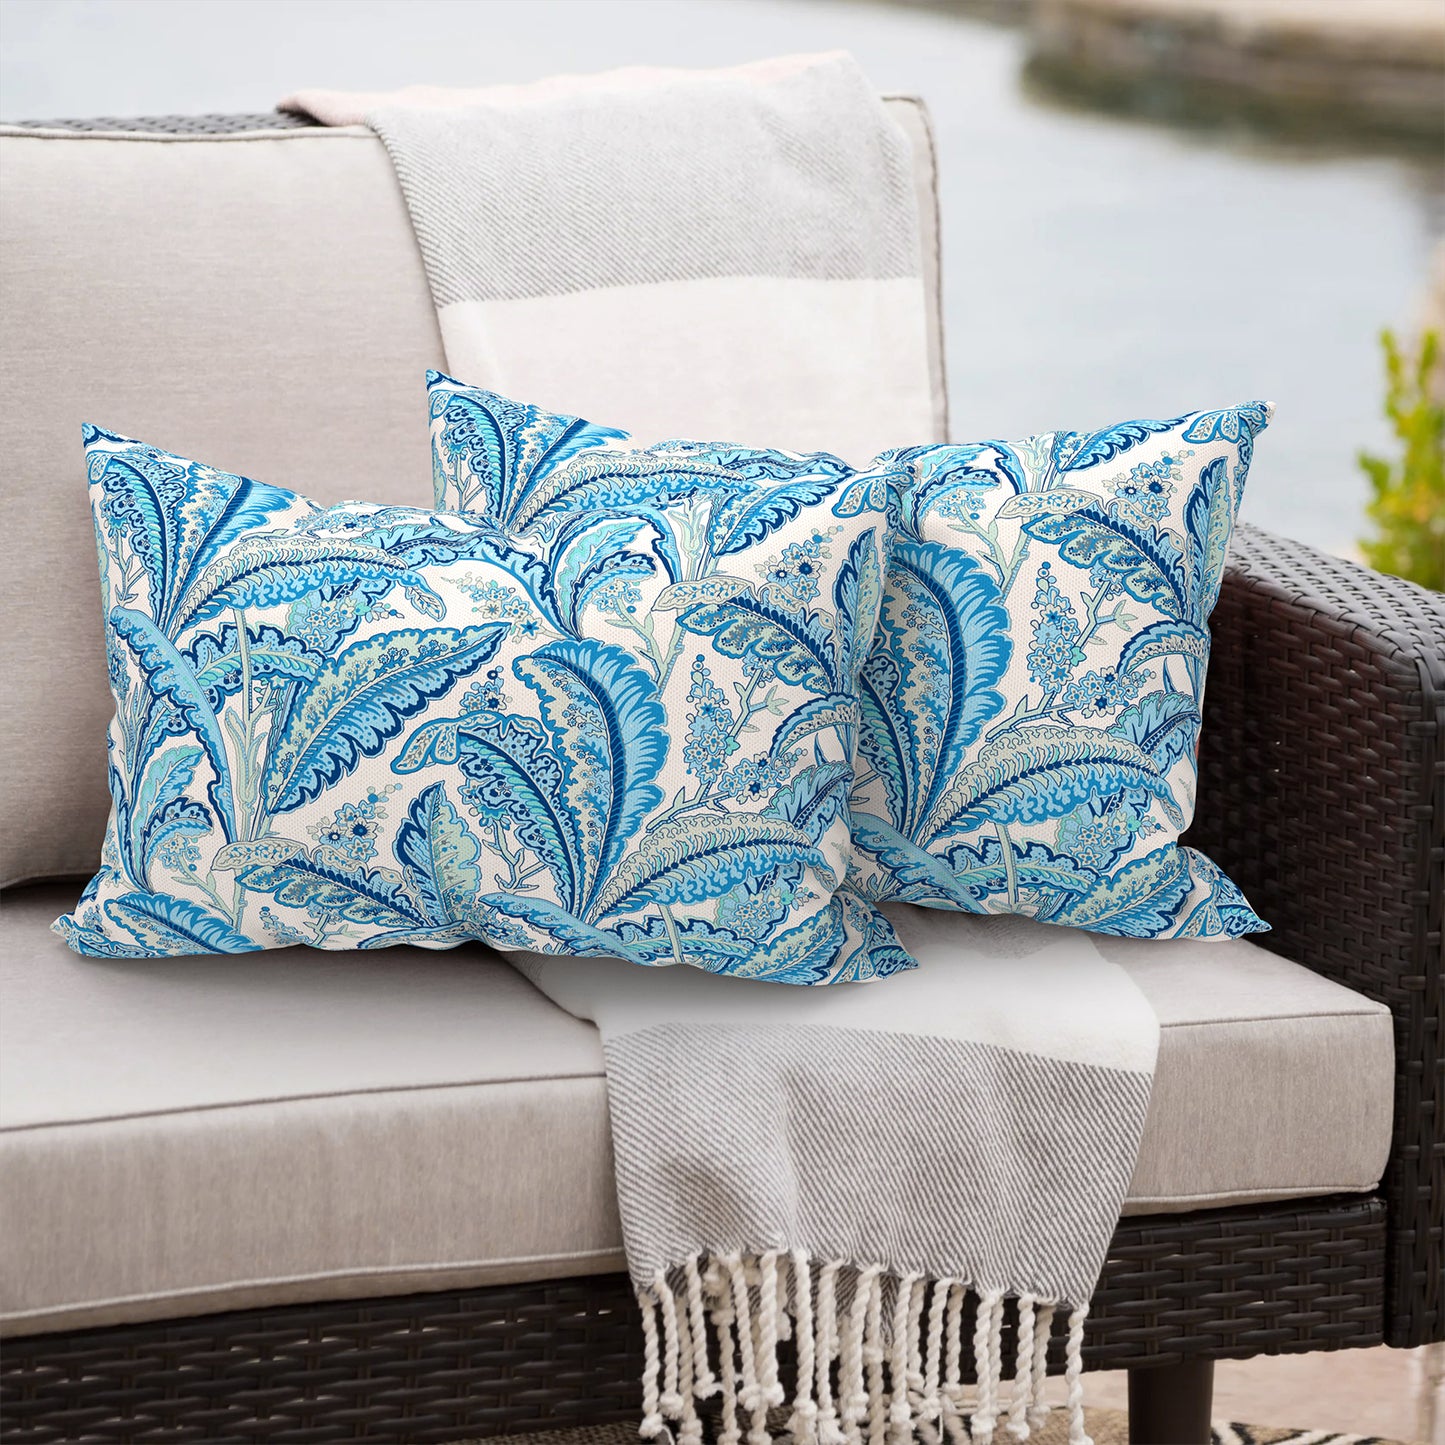 Melody Elephant Outdoor/Indoor Lumbar Pillows, Water Repellent Cushion Pillows, 12x20 Inch, Outdoor Pillows with Inserts for Home Garden, Pack of 2, Monotone Leaves Blue